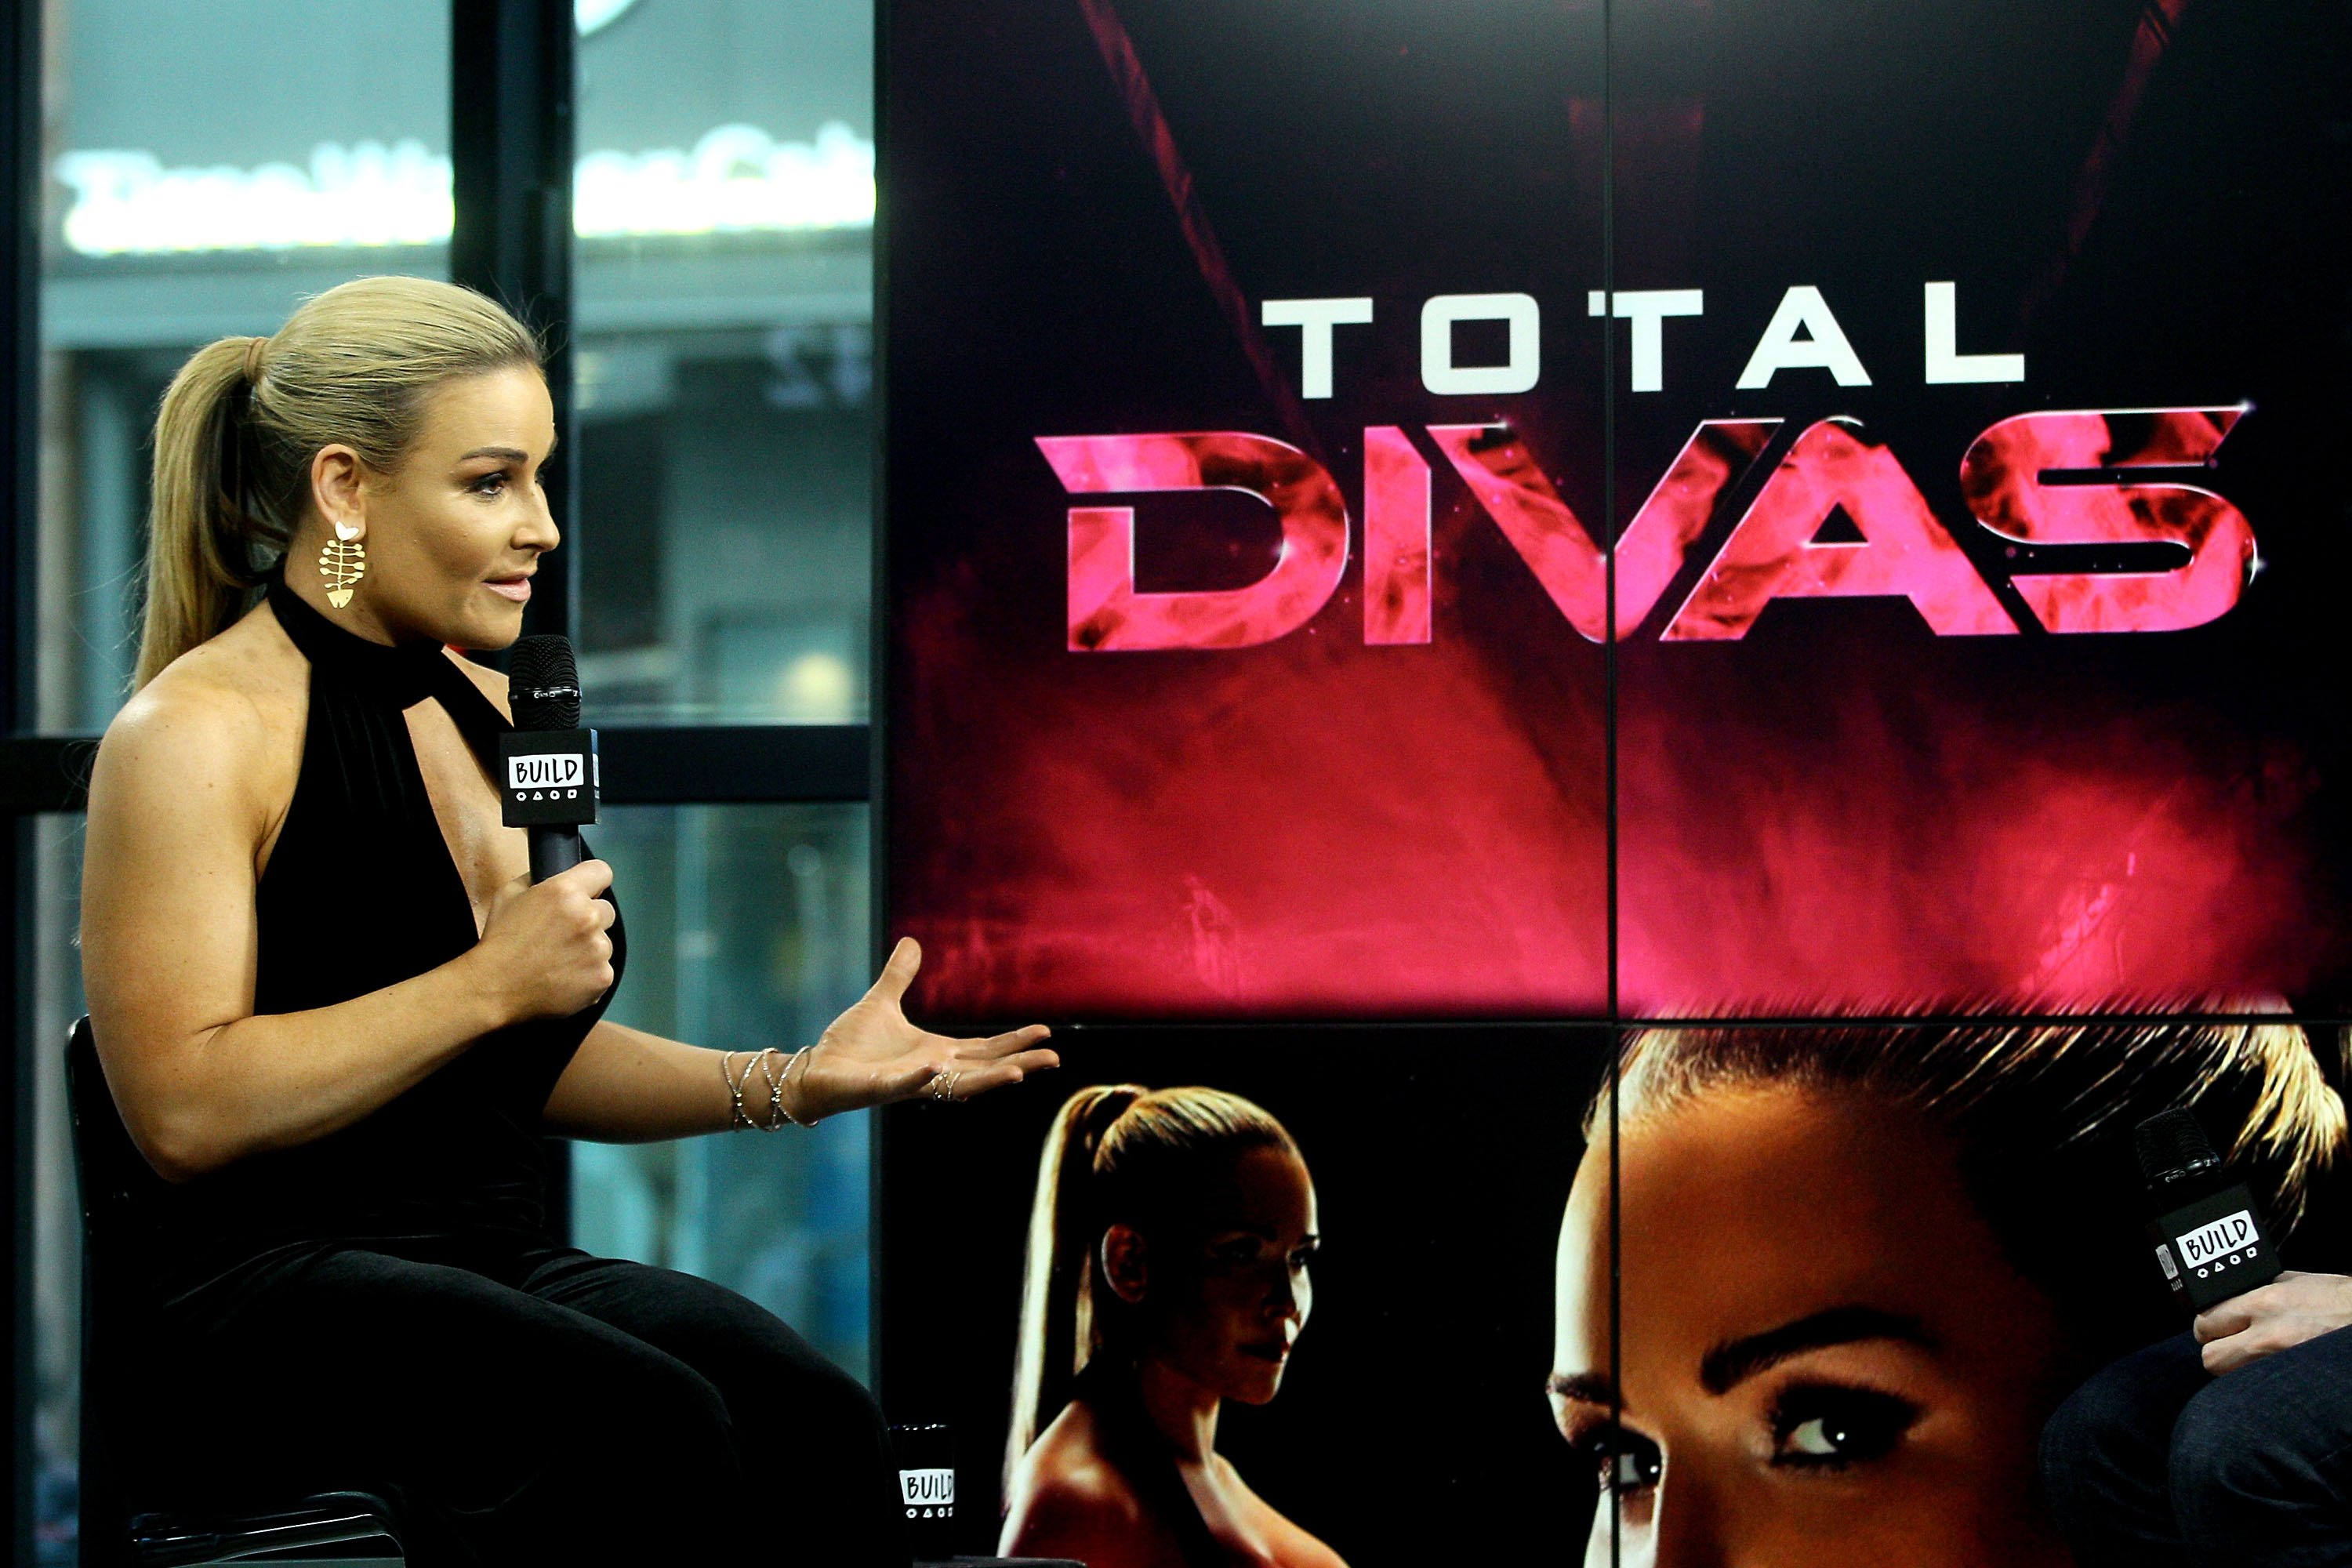 WWE Using ‘All In’ Phrase To Promote The Upcoming Season Of ‘Total Divas’